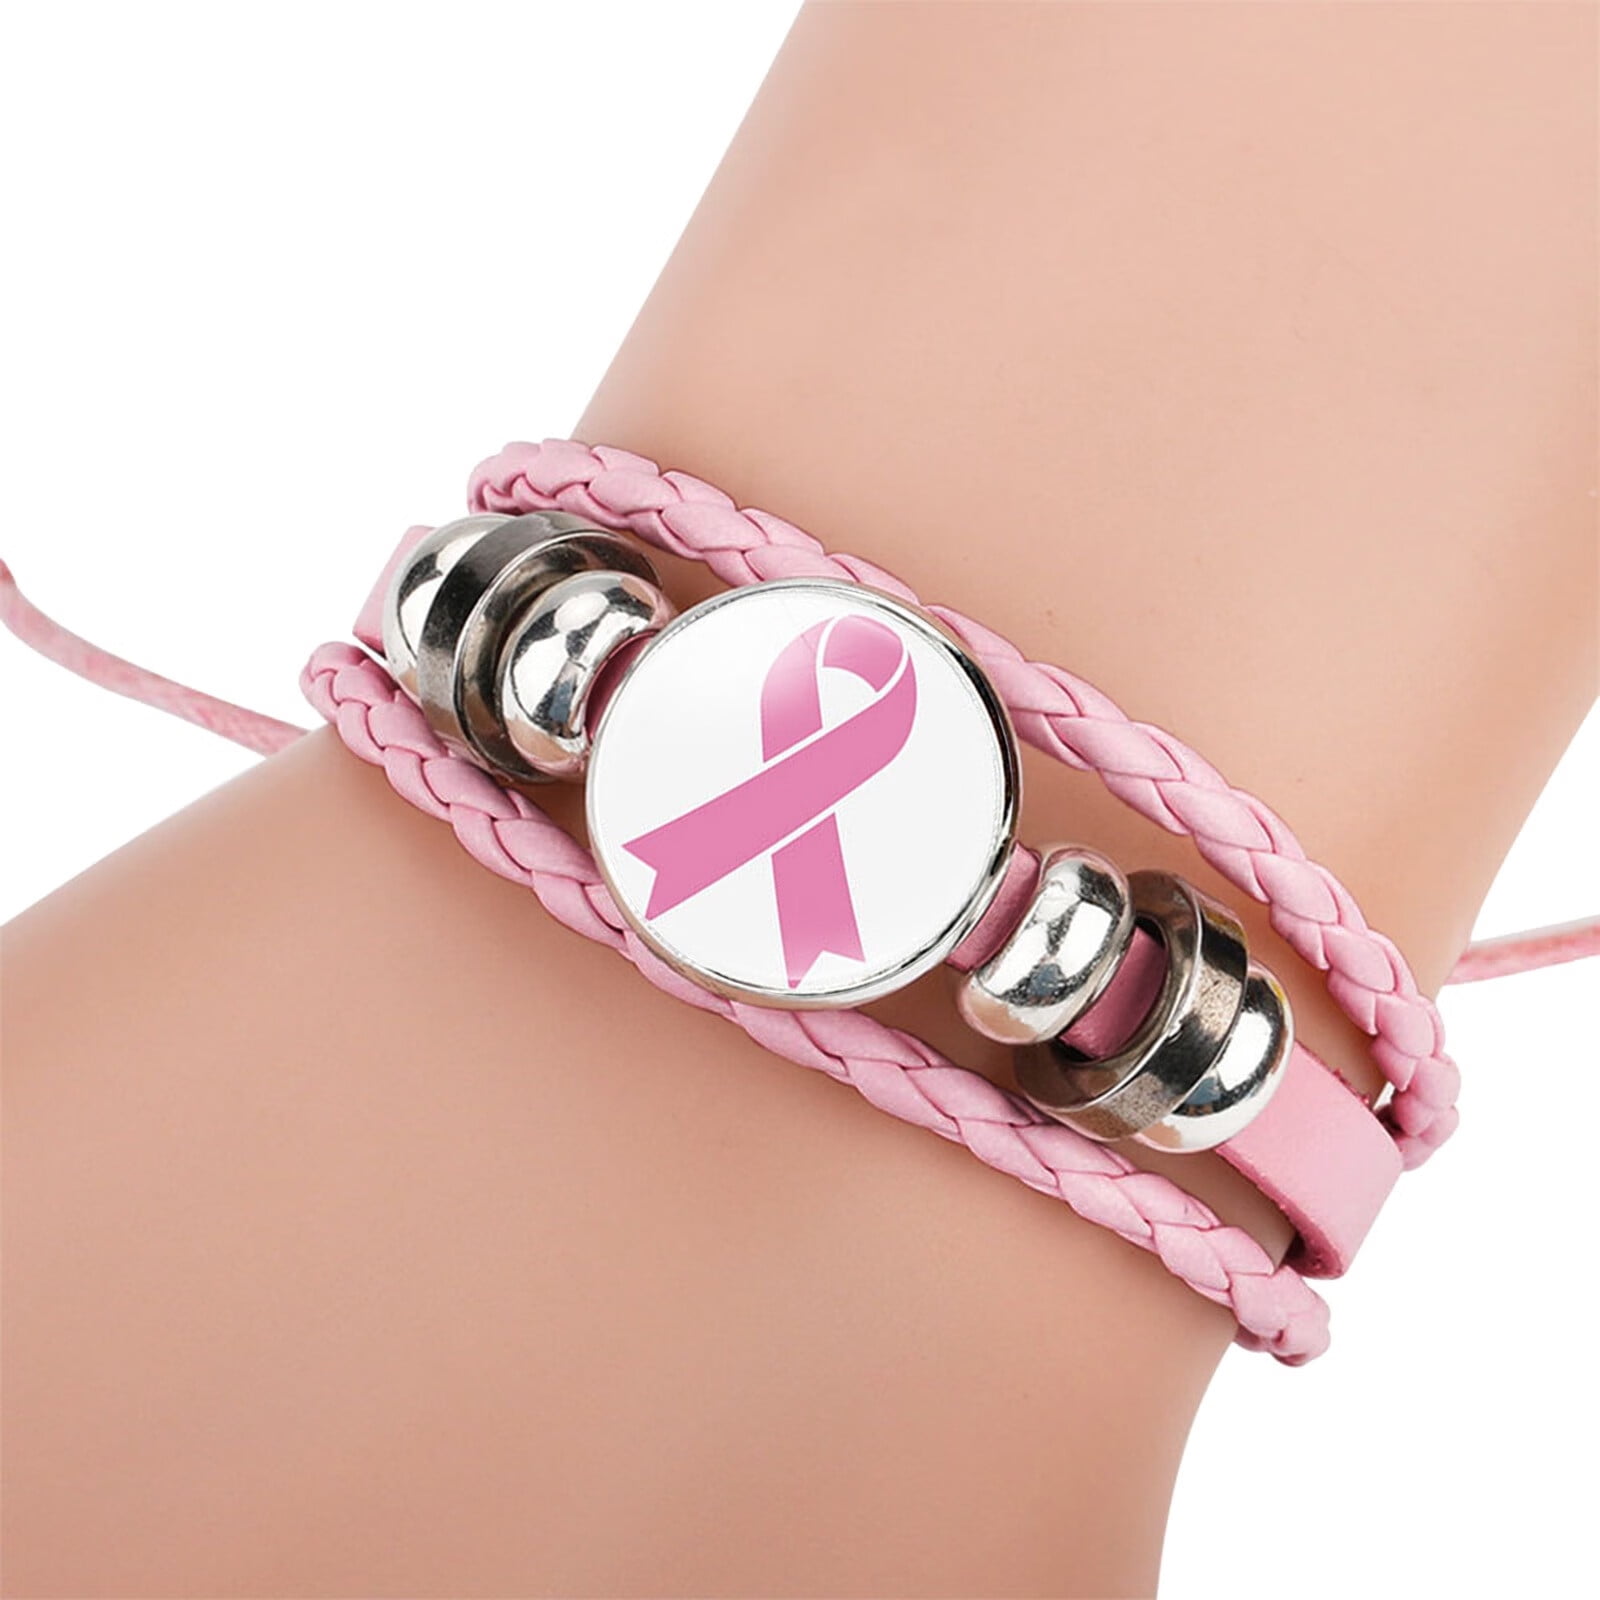 24 Pcs Breast Cancer Awareness Accessories Bracelets?- Pink Ribbon Breast  Cancer Awareness Silicone Wristbands with Faith Courage Hope Strength -  Walmart.ca